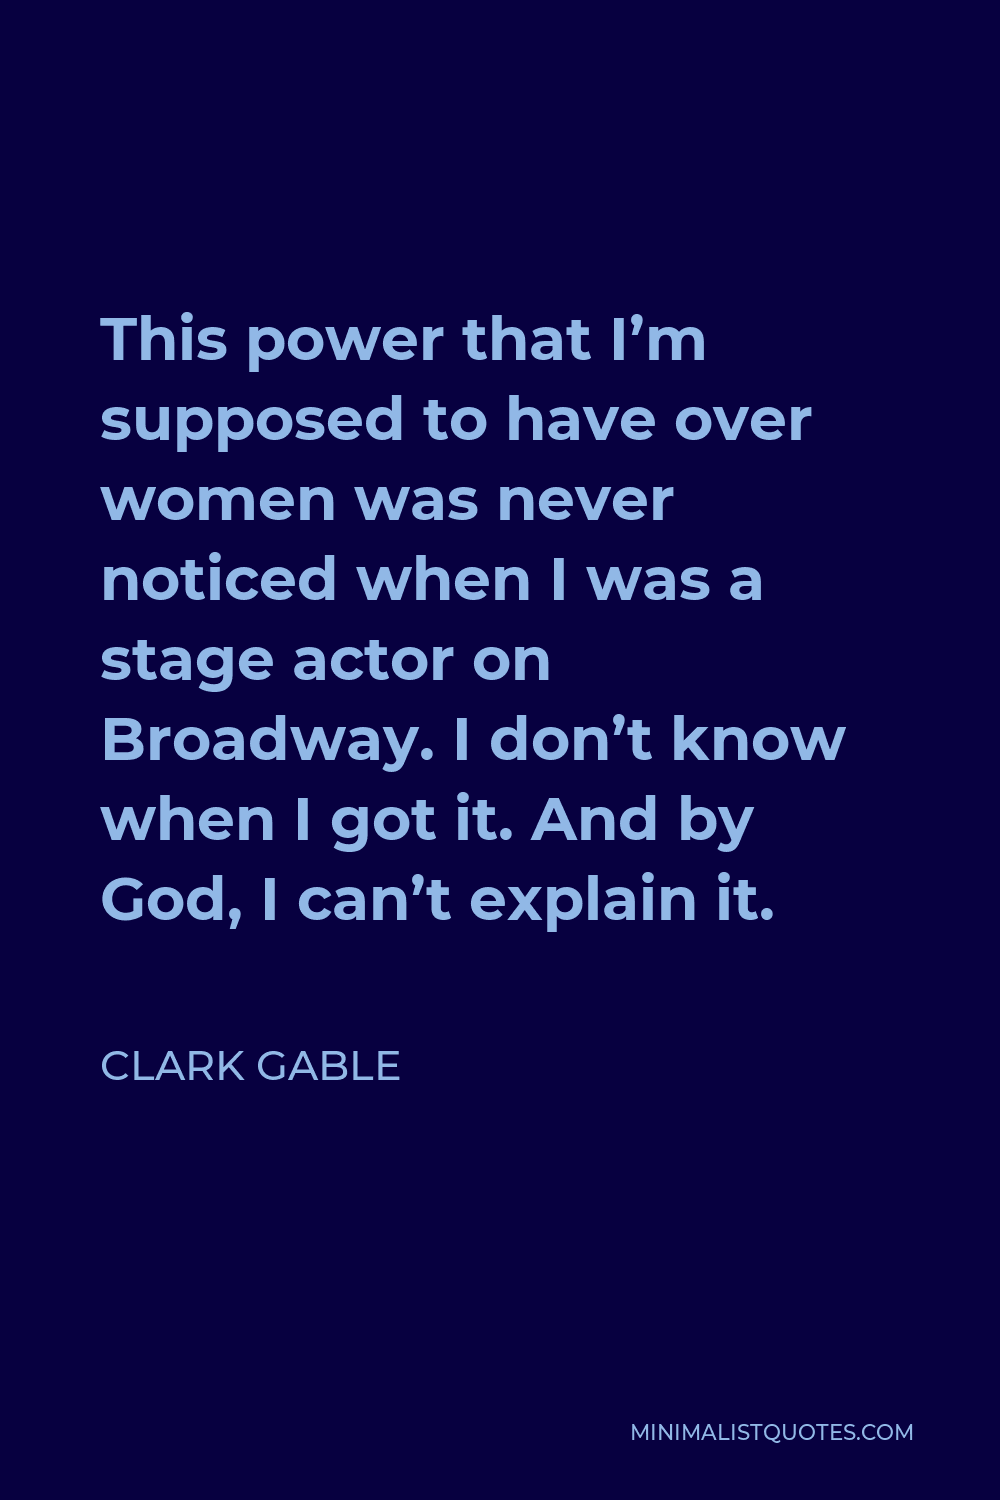 Clark Gable Quote - This power that I’m supposed to have over women was never noticed when I was a stage actor on Broadway. I don’t know when I got it. And by God, I can’t explain it.